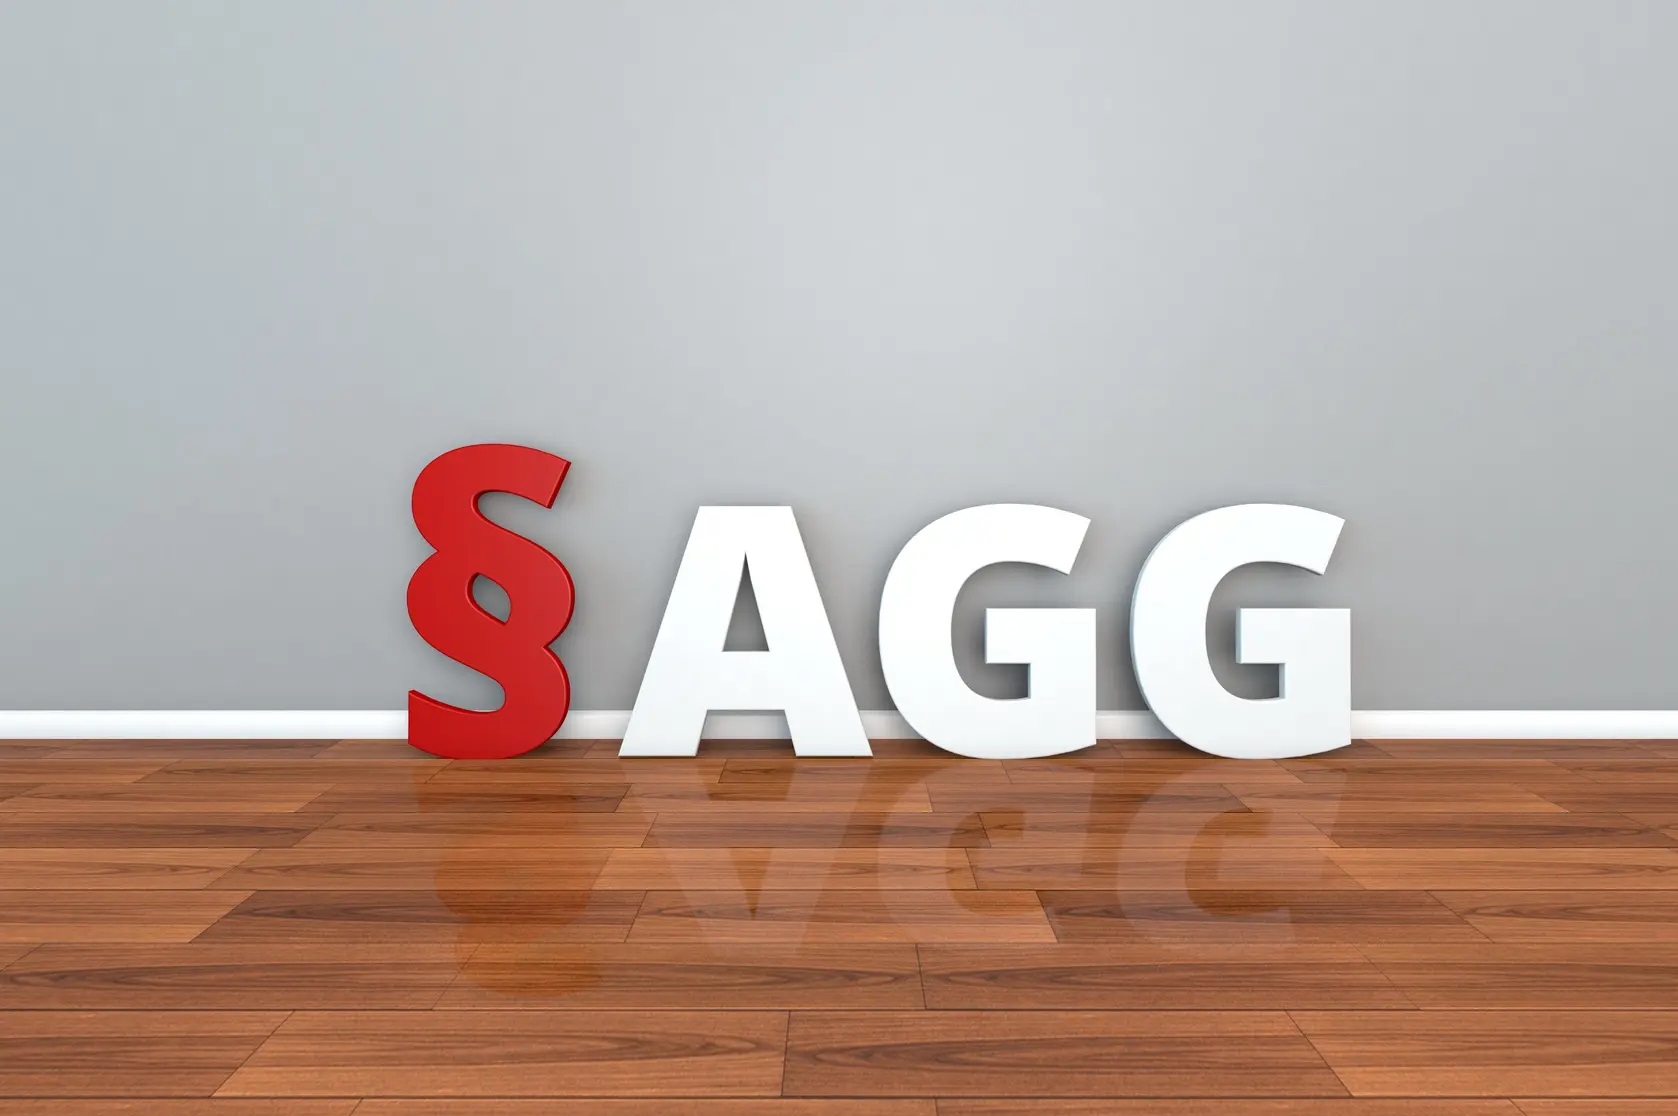 What exactly does AGG stand for?